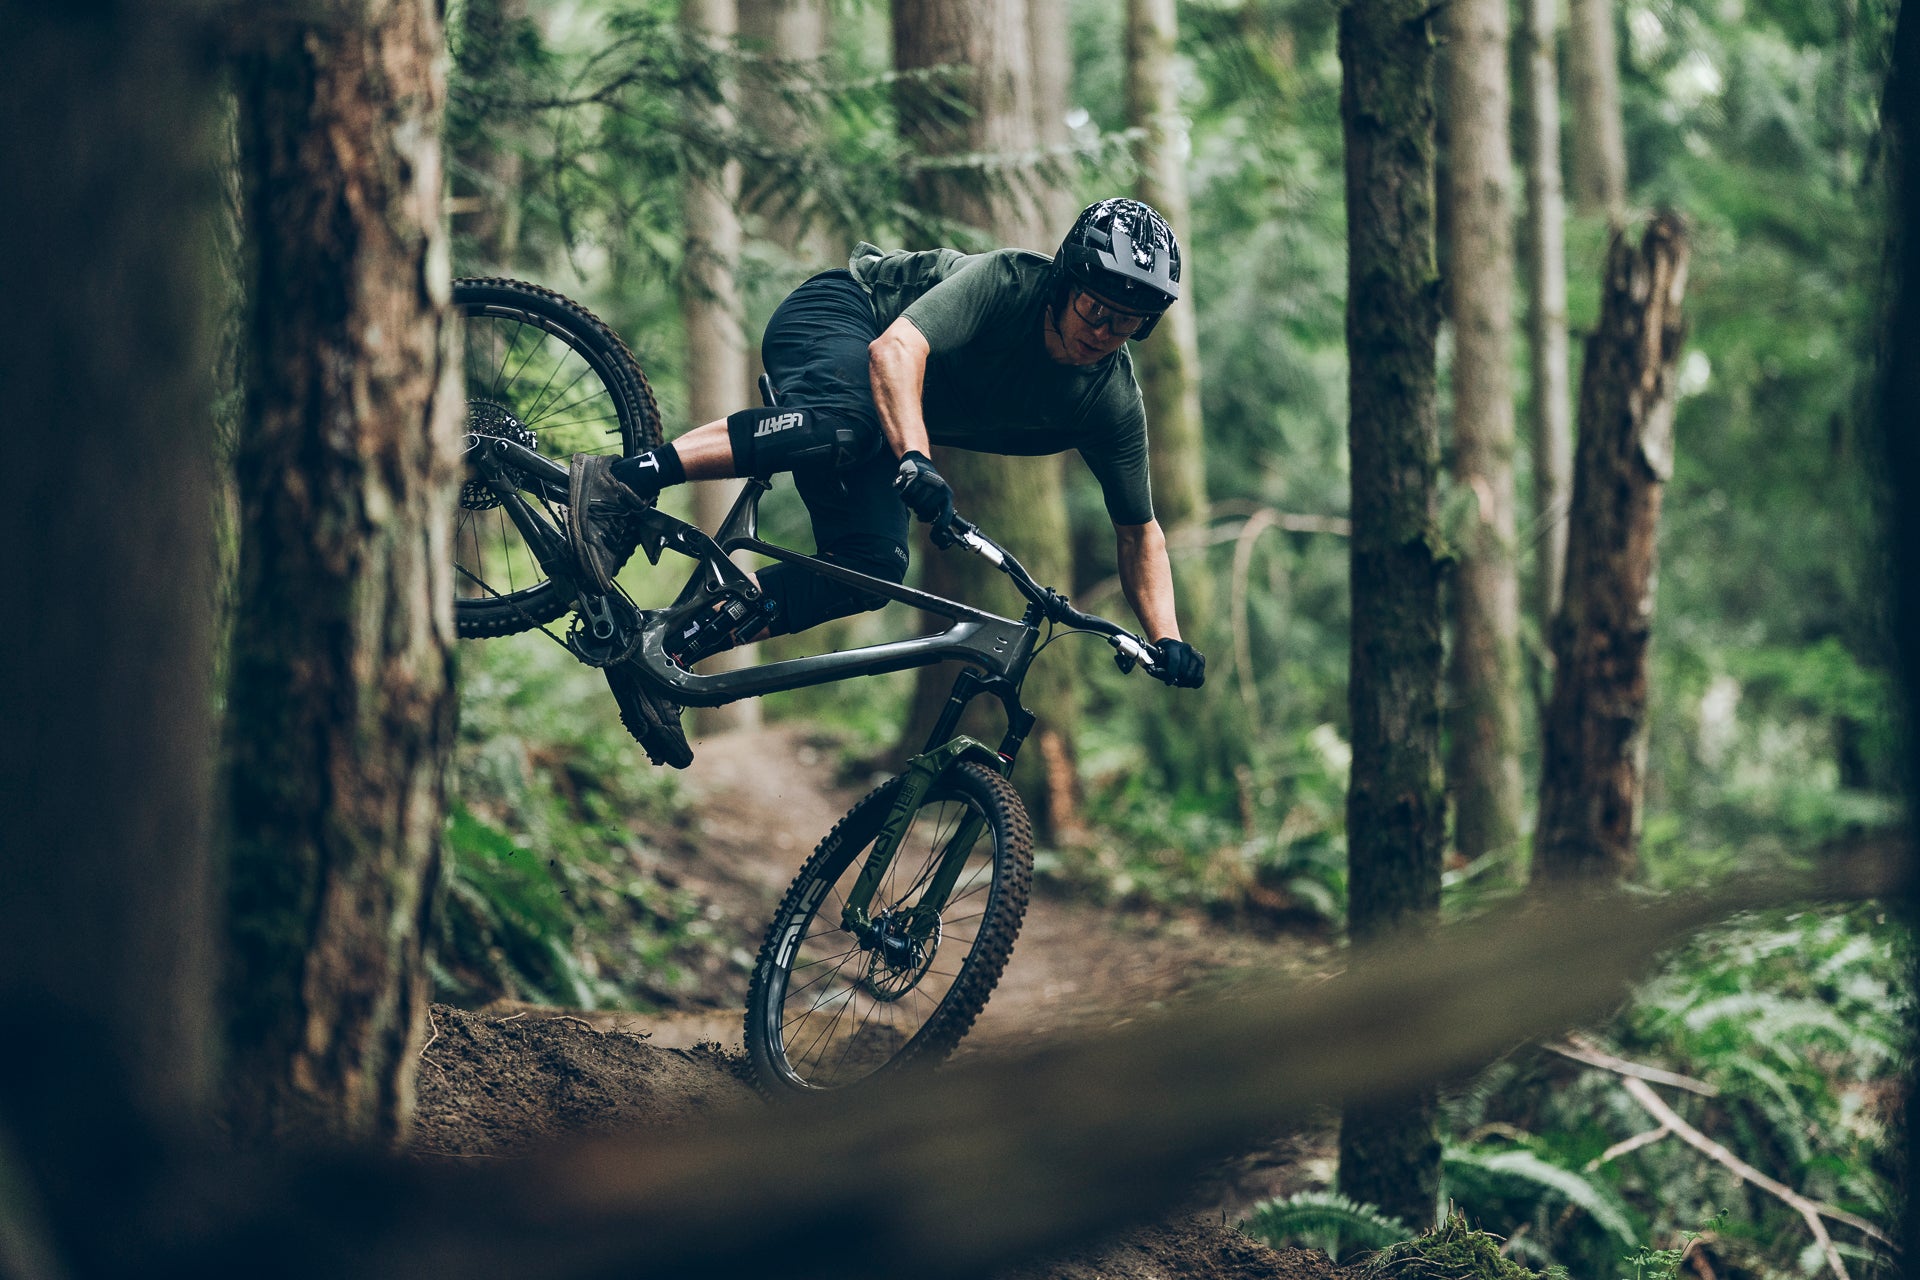 Caleb Holonko Featured in New Rock Shox Charger 3.1 Video | Kona Bikes